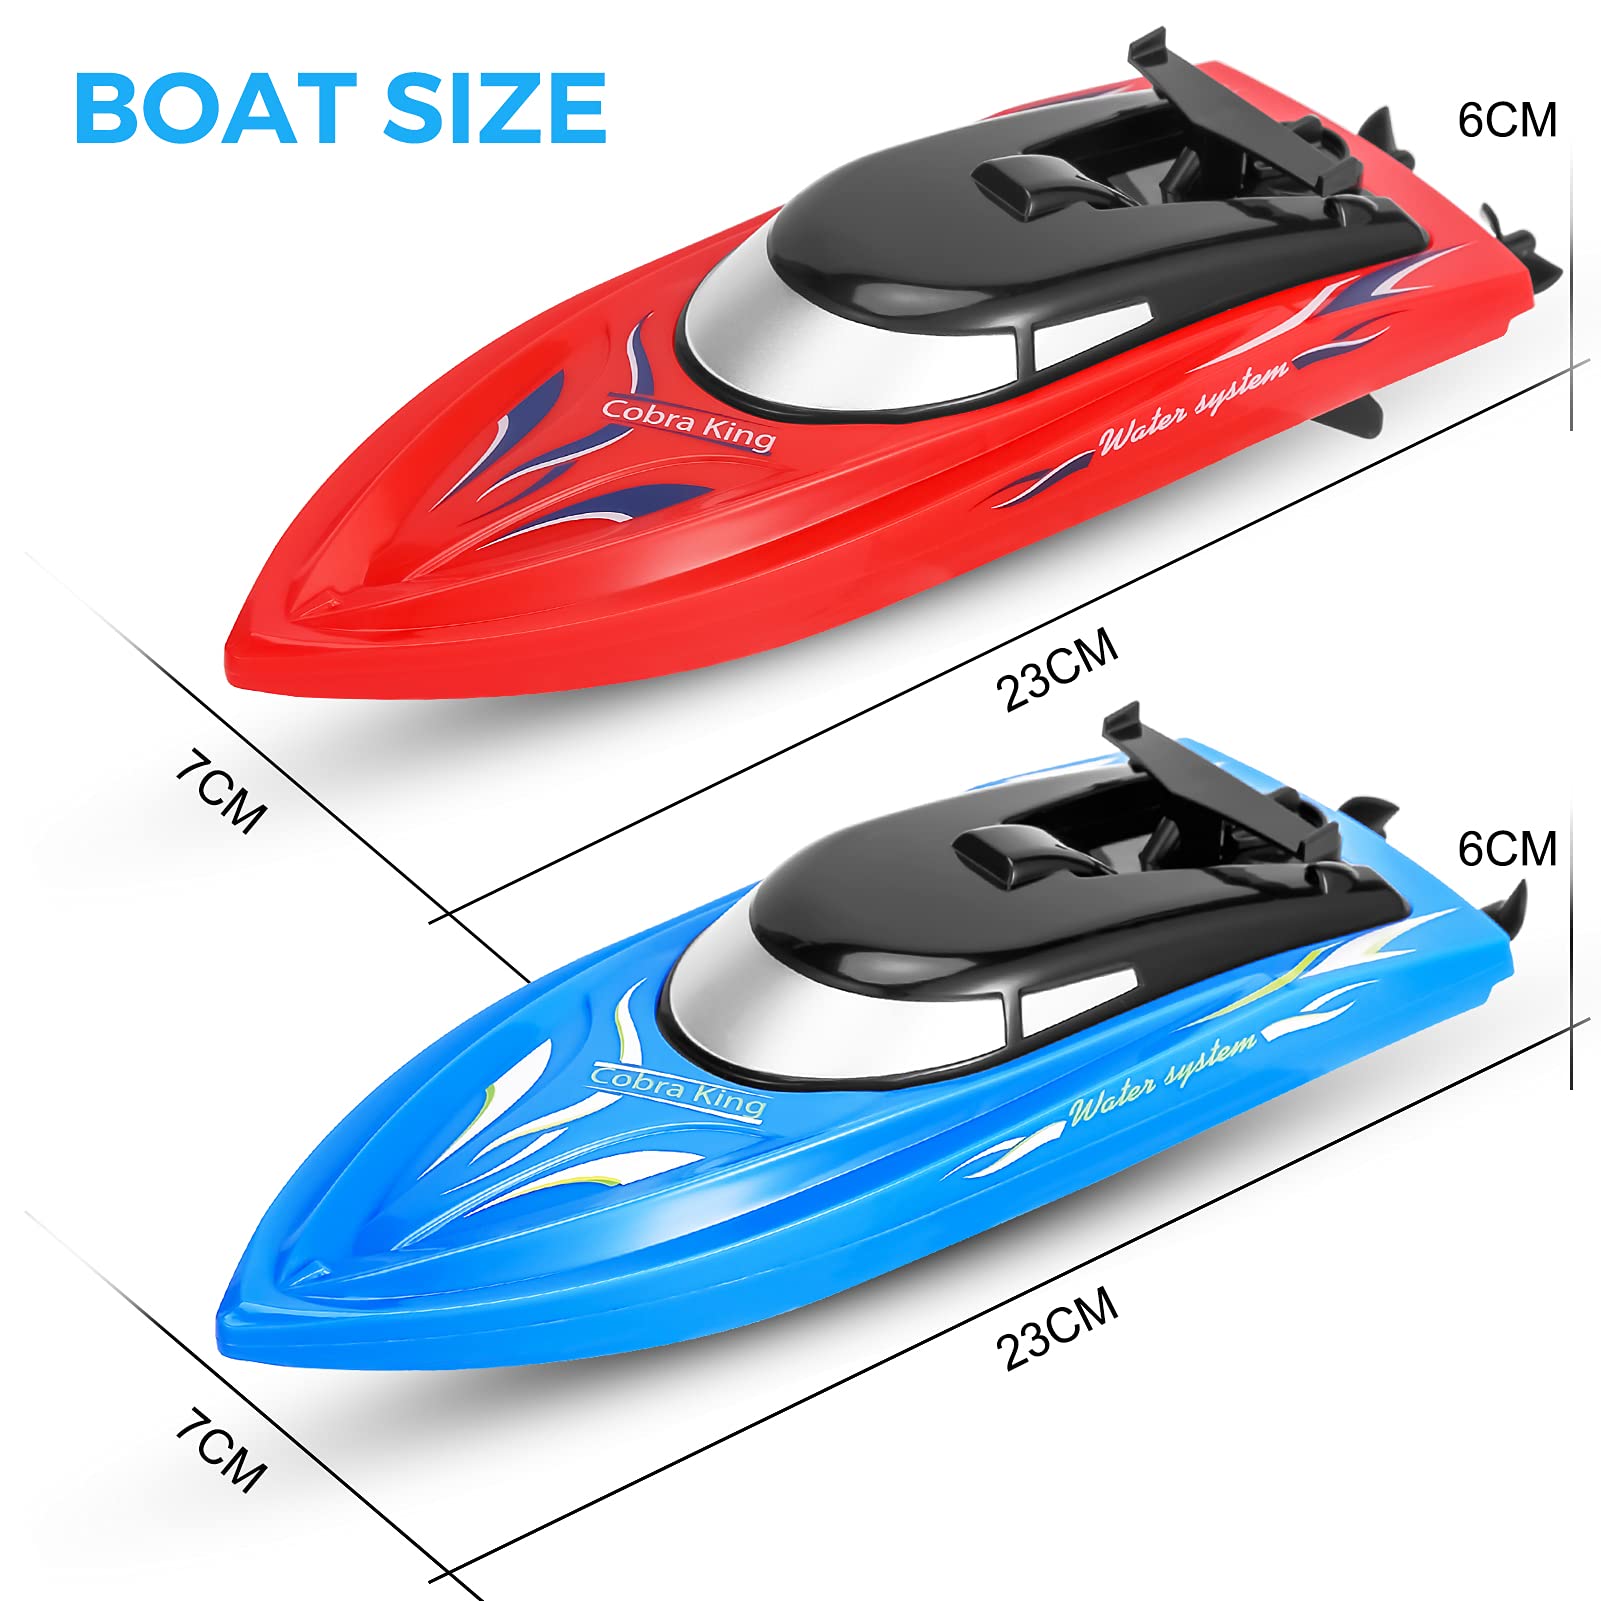 THINKMAX 3PACK 2.4G High Speed Remote Control Boats